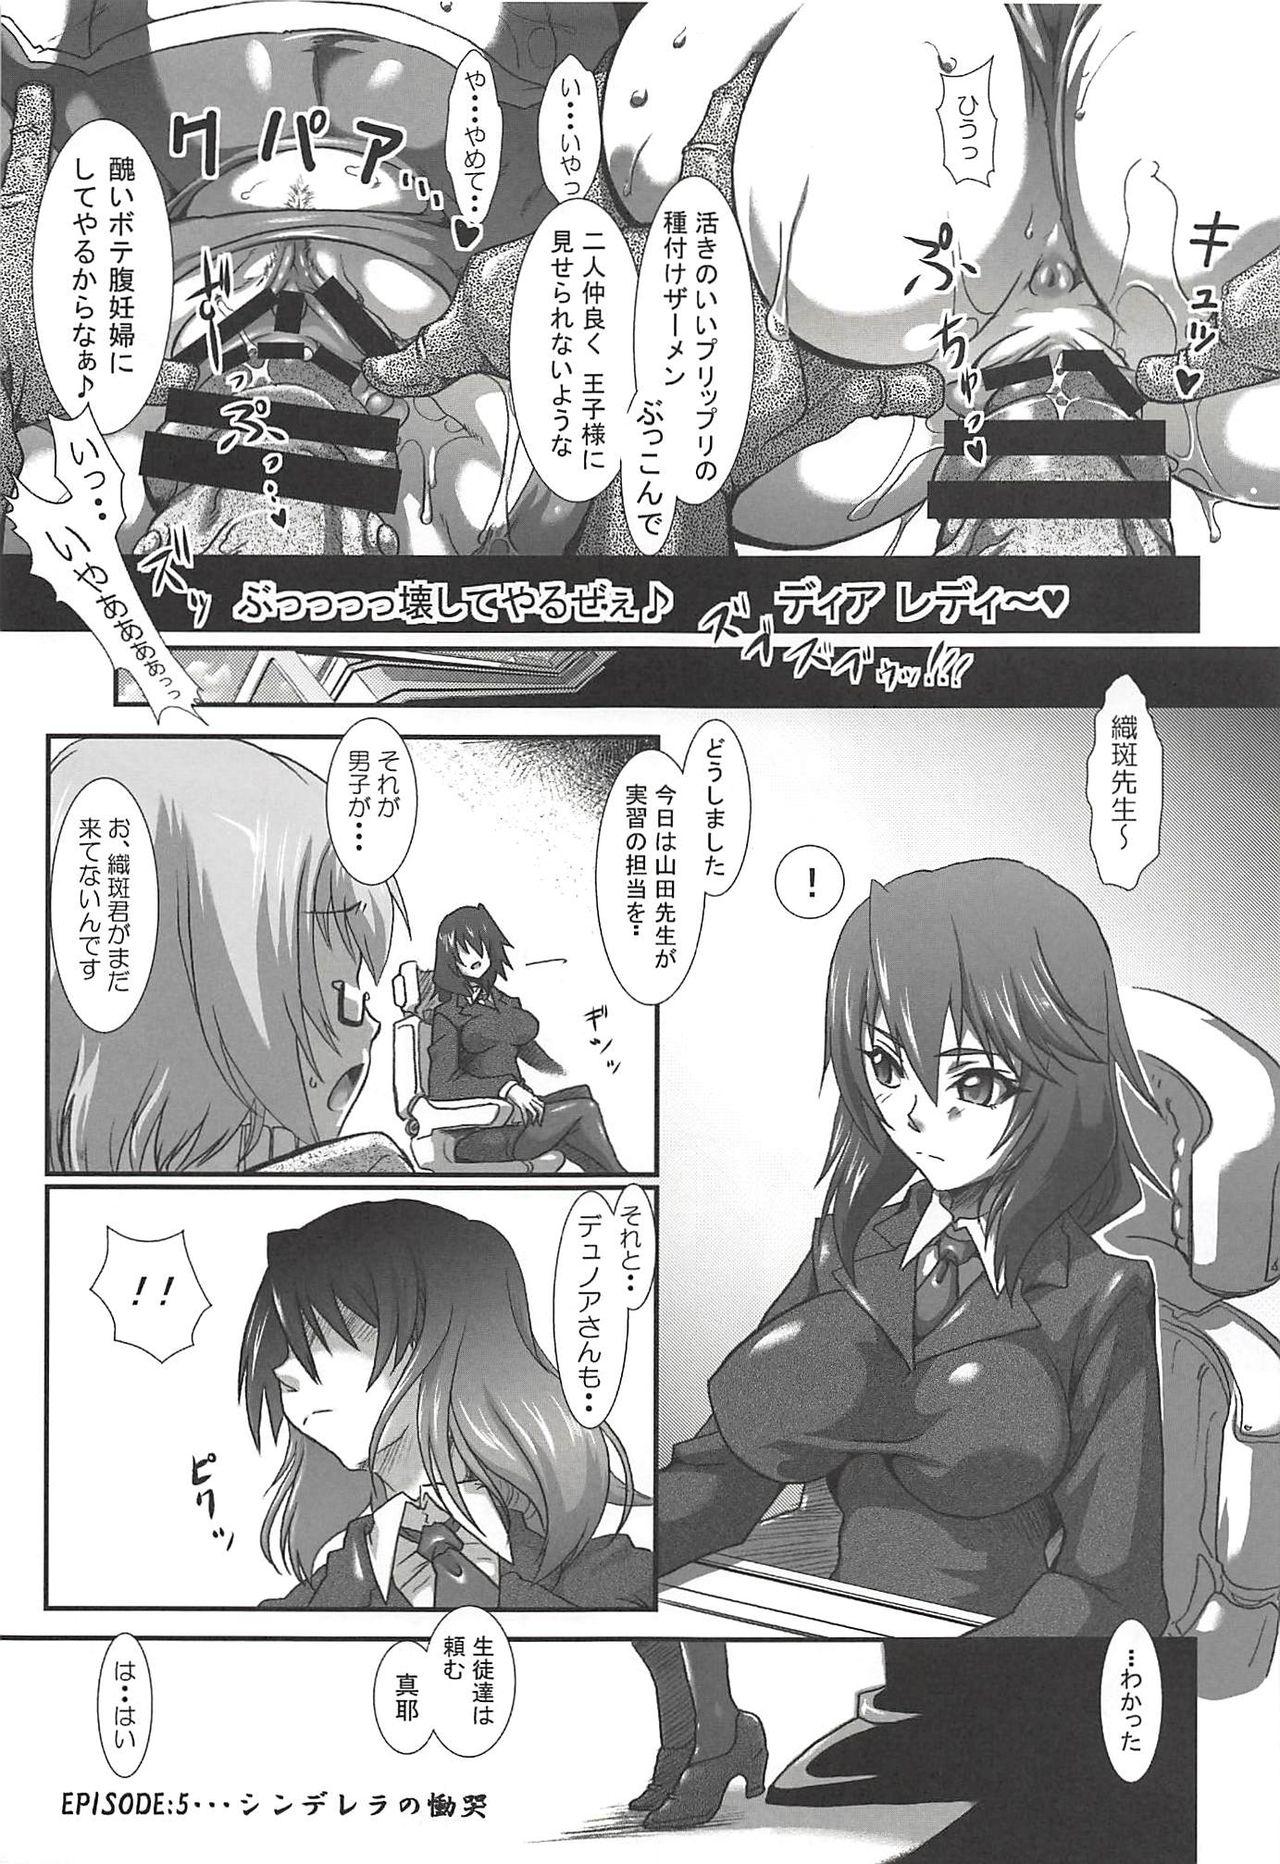 Cowgirl Ura Choroi Report - MOON OF THE TWILIGHT - Infinite stratos Francais - Page 8